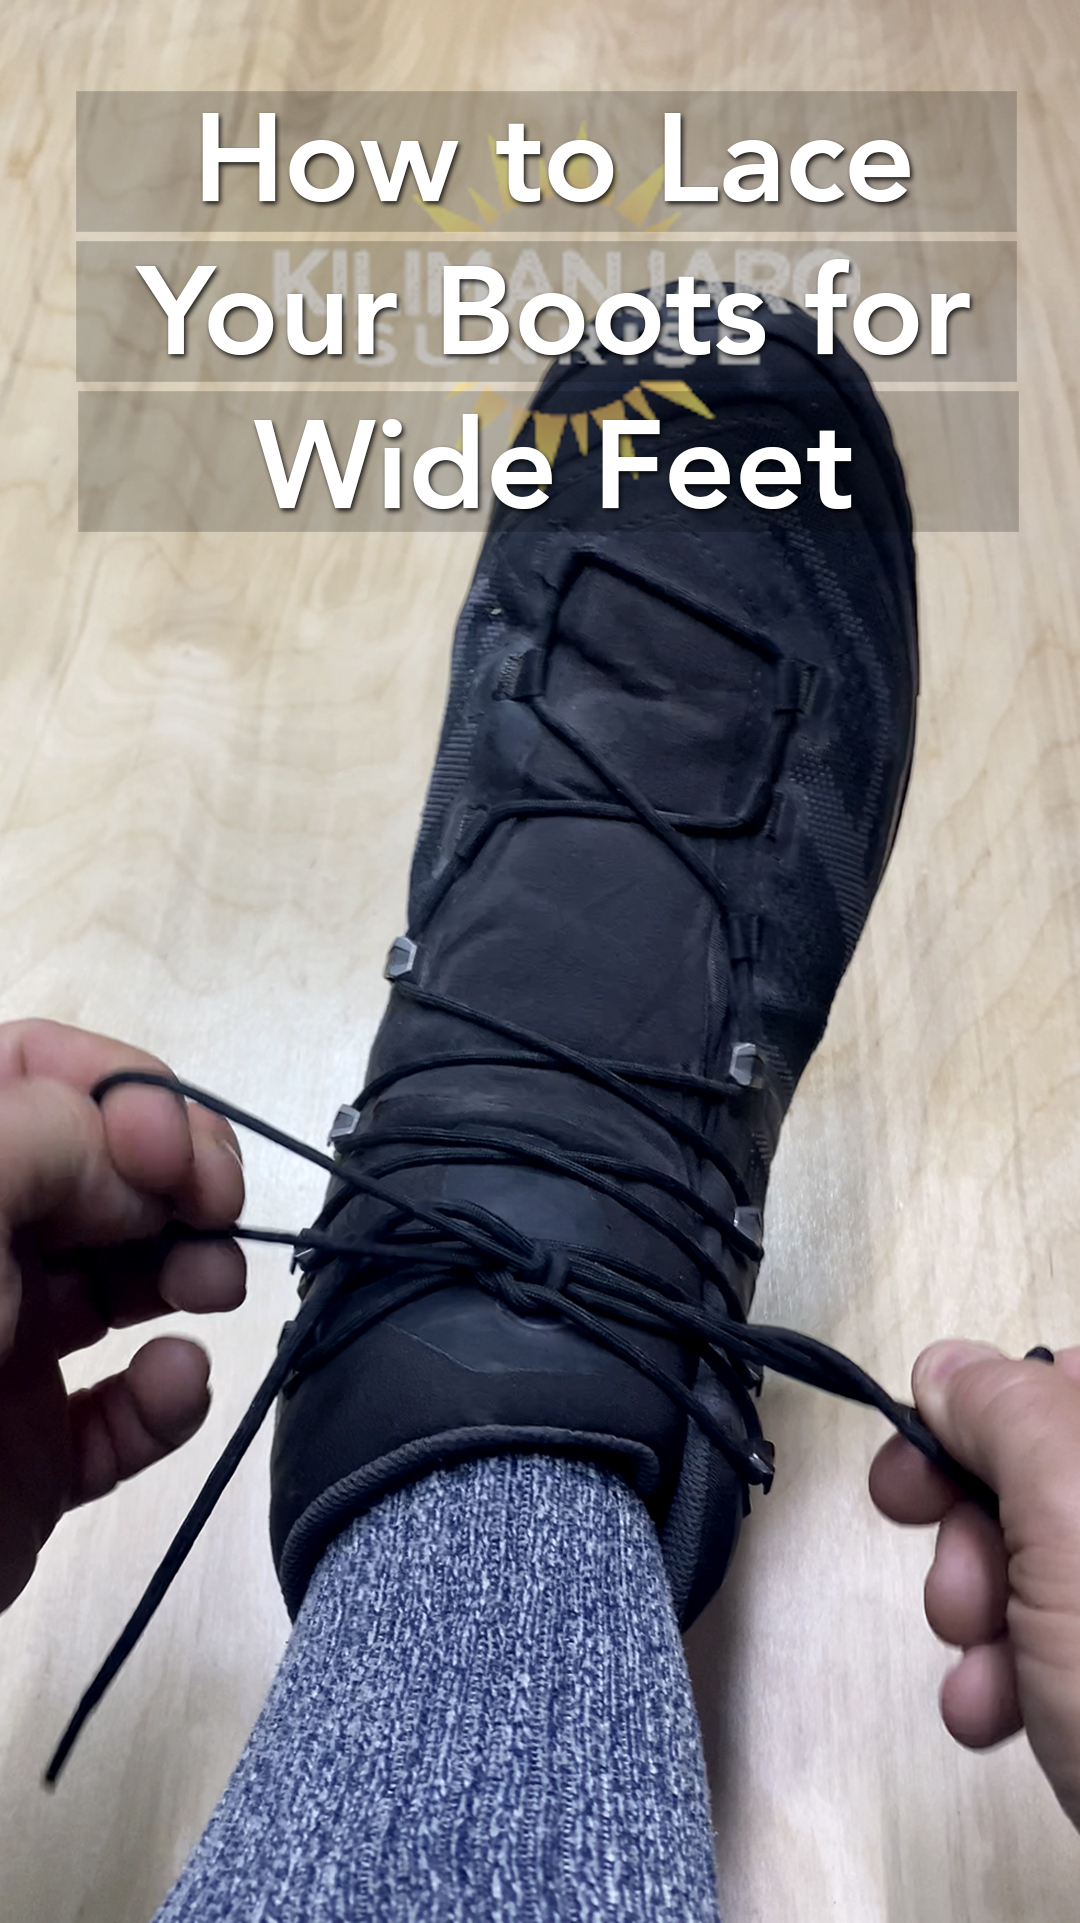 How to Lace Your Boots For Wide Feet